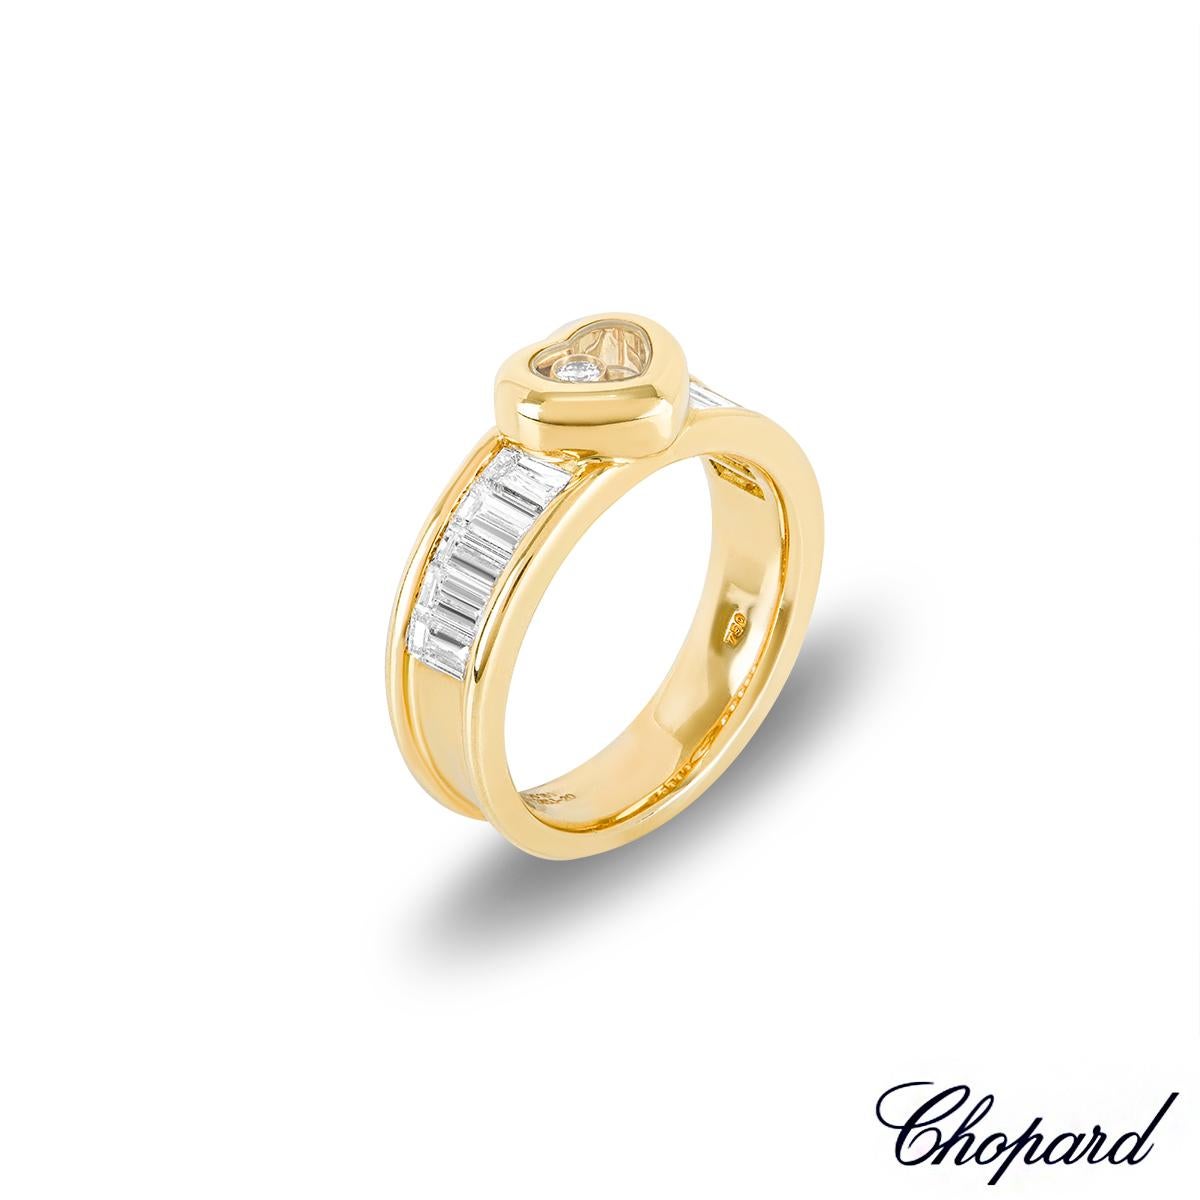 A lovely yellow gold ring from the Chopard Happy Diamonds collection. The ring is set to the centre with a heart motif, made up of the iconic Chopard signed glass, encasing a 0.05ct single bezel set floating diamond. Complementing the motif are 10